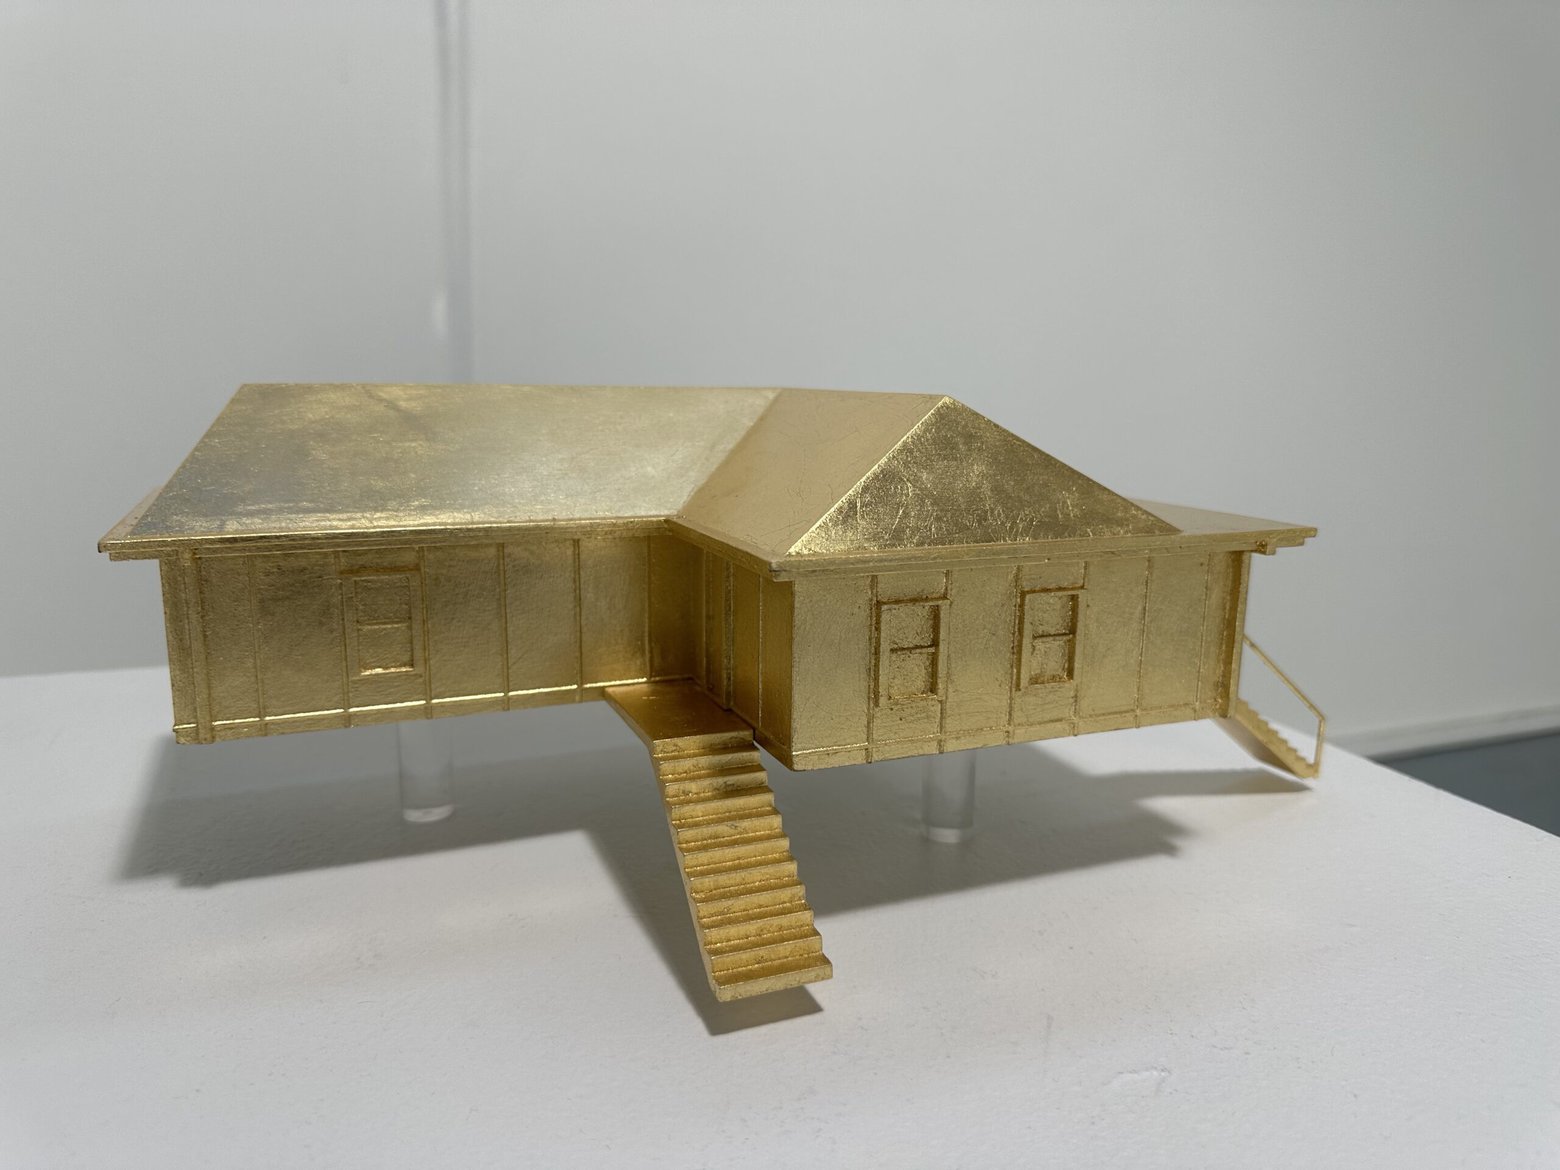 ‘Golden House Series: House 6’, 2022-23, stereolithographic model and gold leaf, 13 x 26 x 33 cm (size varies), edition of 2